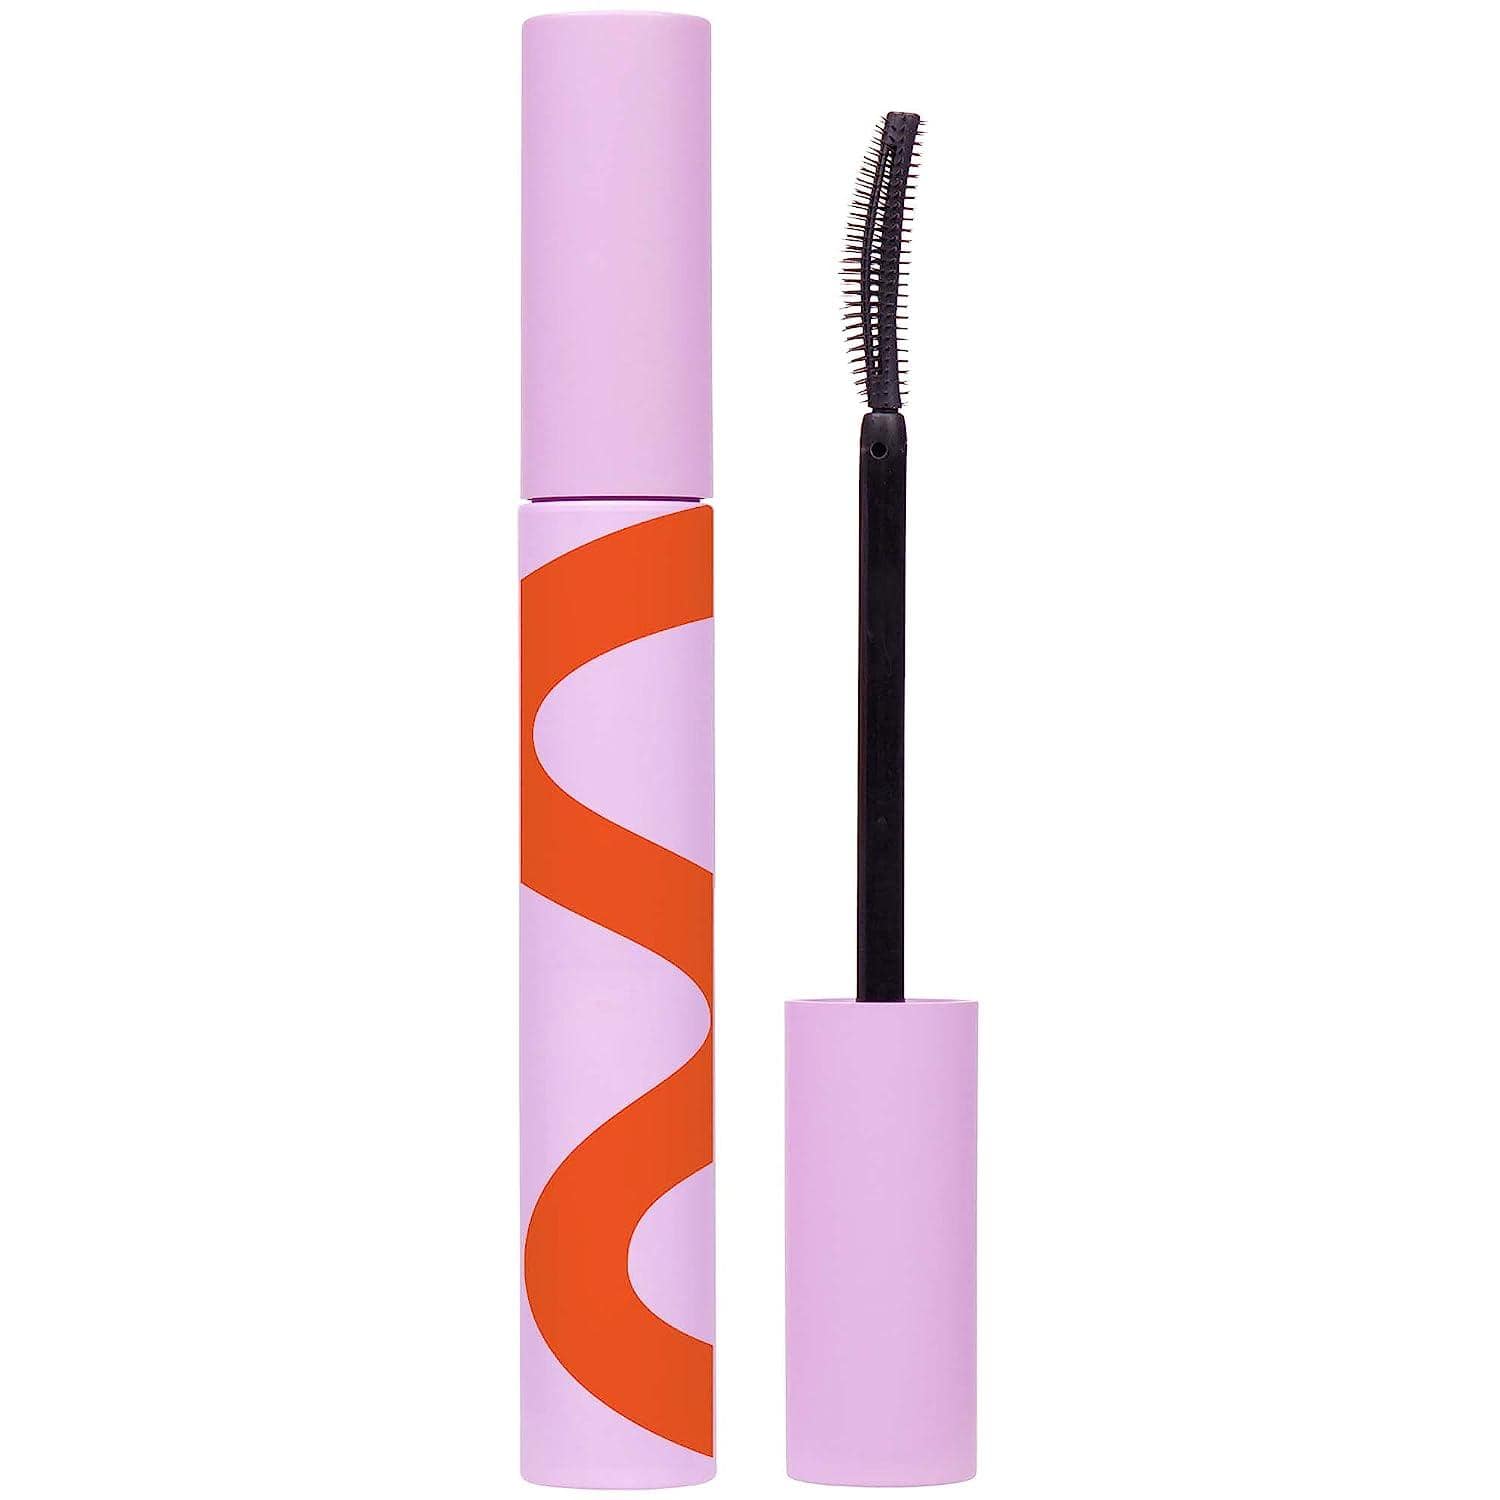 With tiny yet mighty bristles, this mascara proves to be the best for length and volume, delivering transformative results. Its water-resistant and humidity-proof formula ensures long-lasting impact in my quest for the best mascara for length and volume.